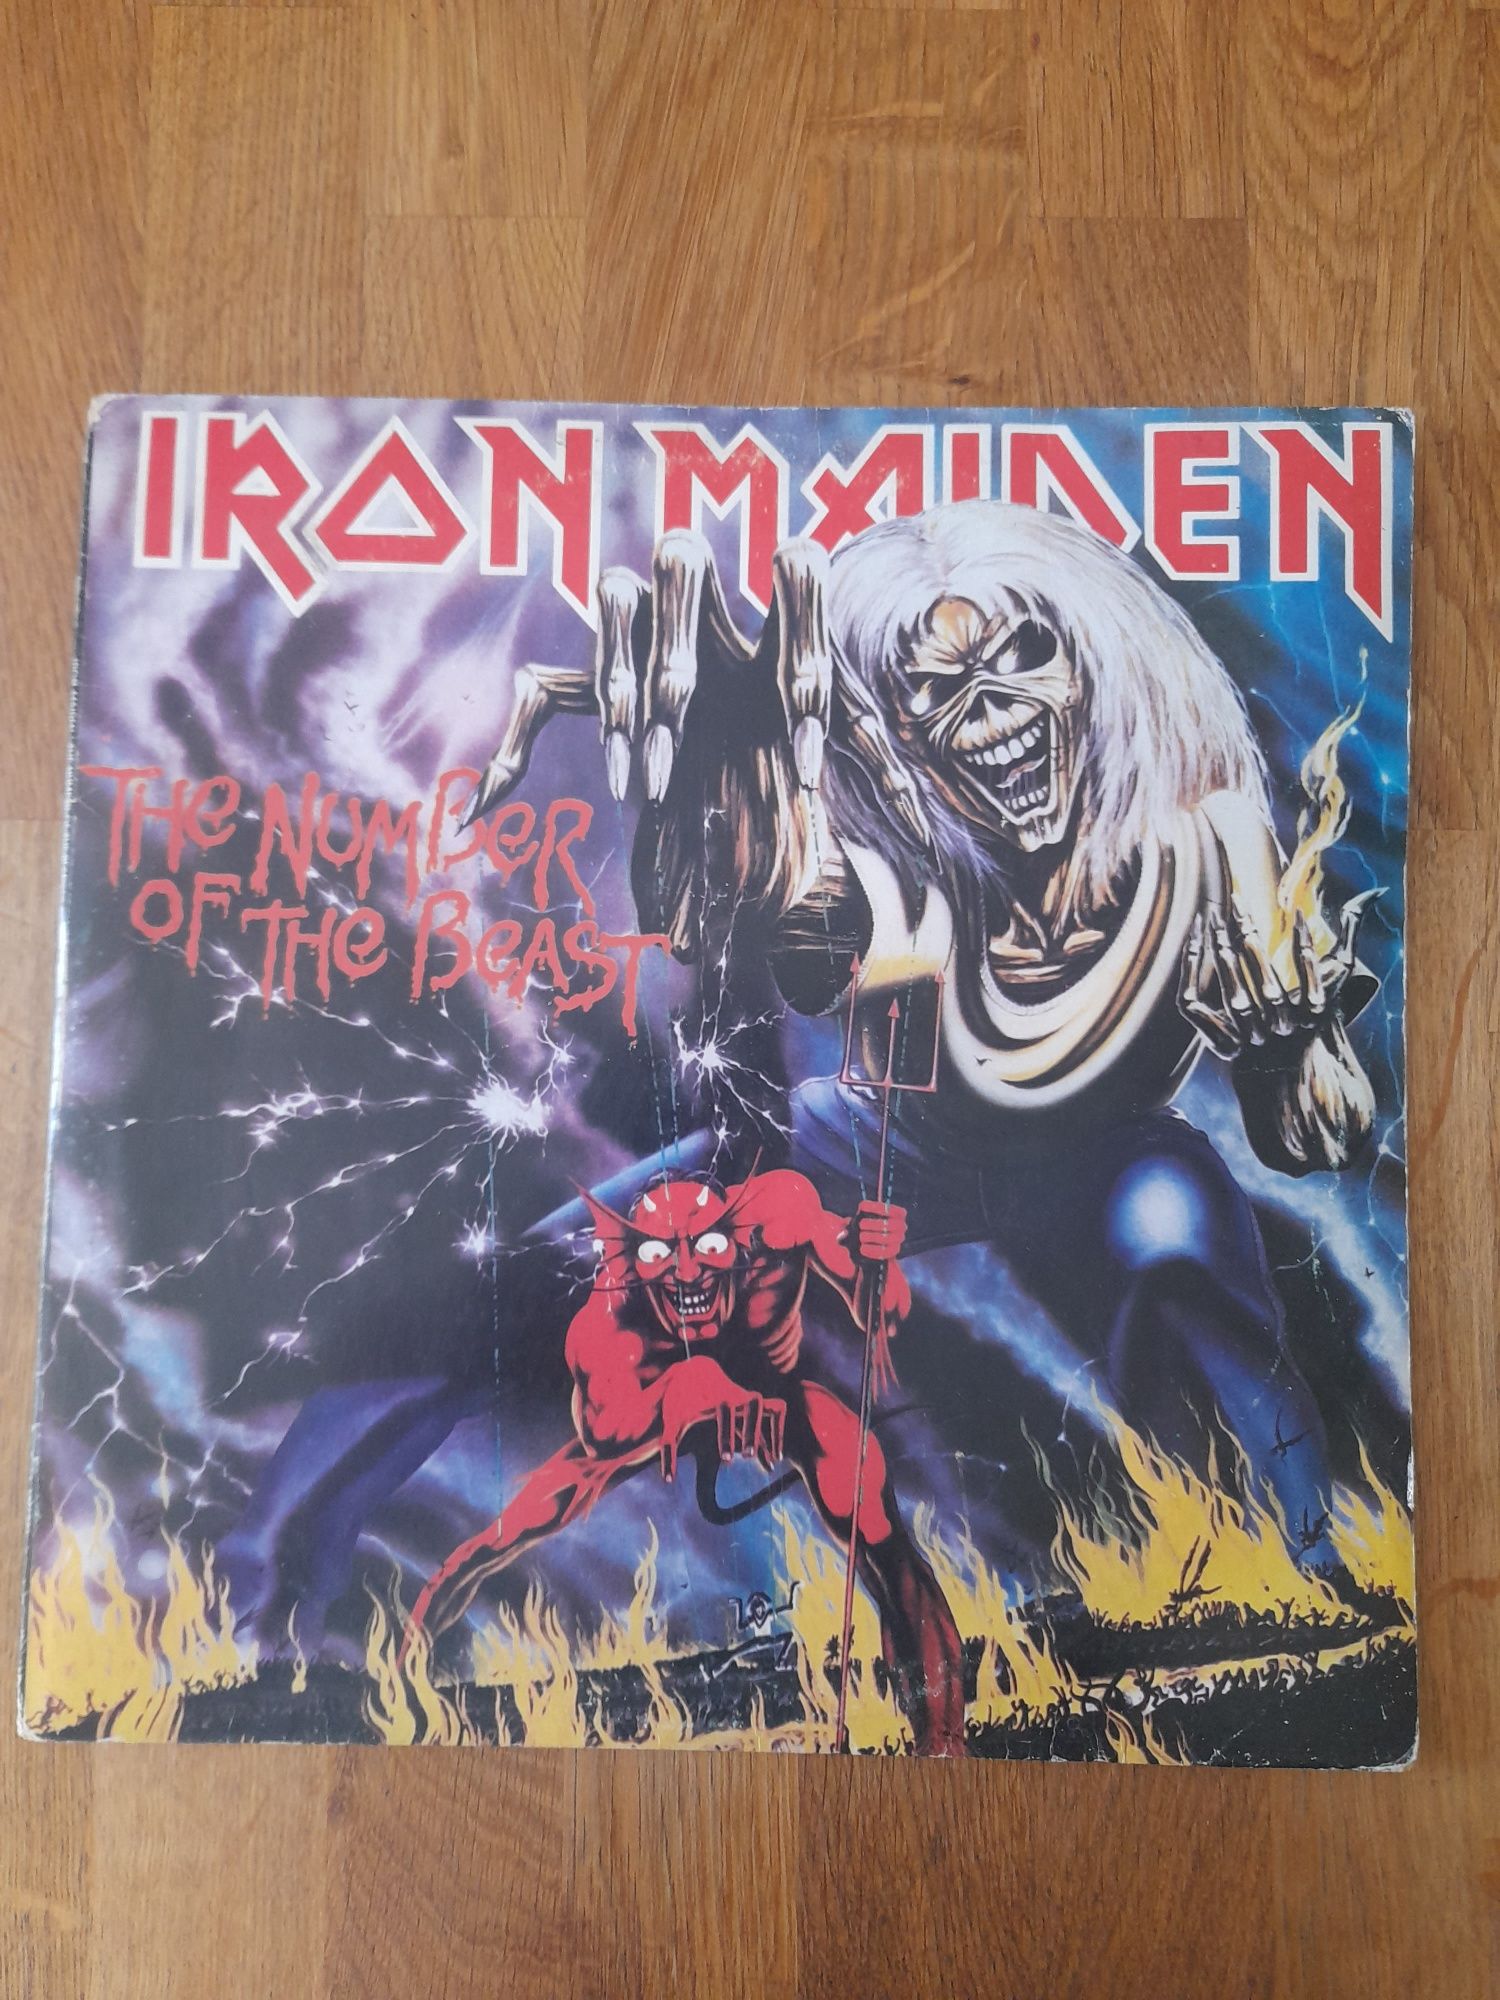 Vinil LP IRON MAIDEN The Number of the Best